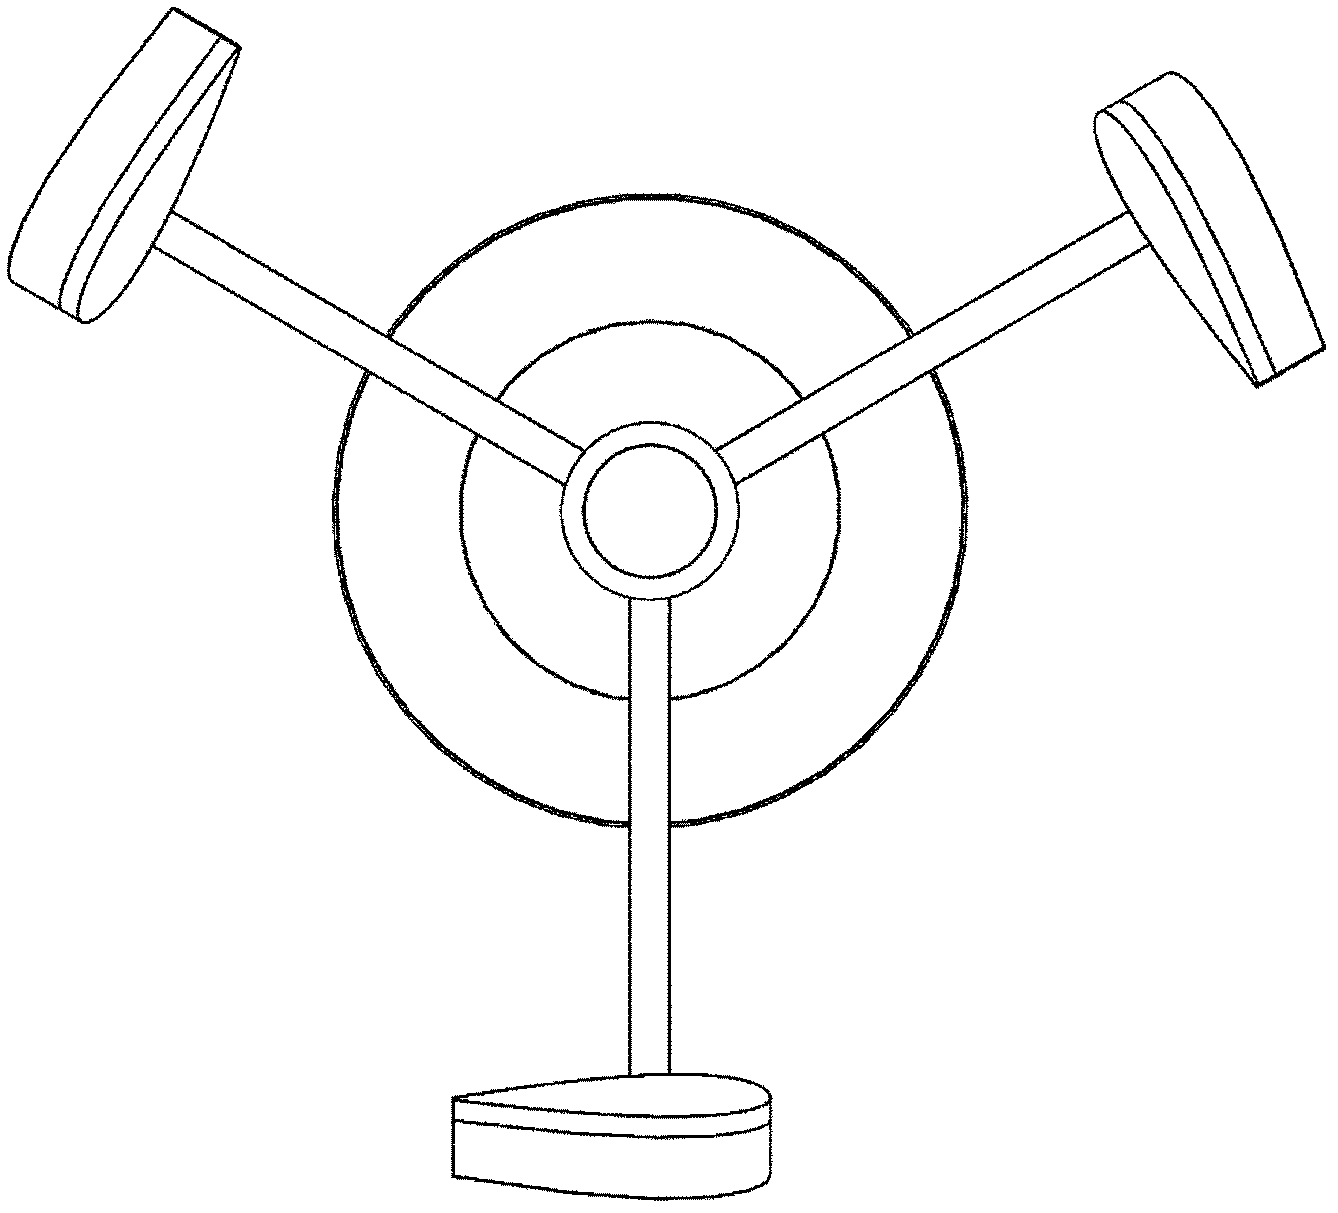 Blade and impeller of vertical shaft wind driven generator